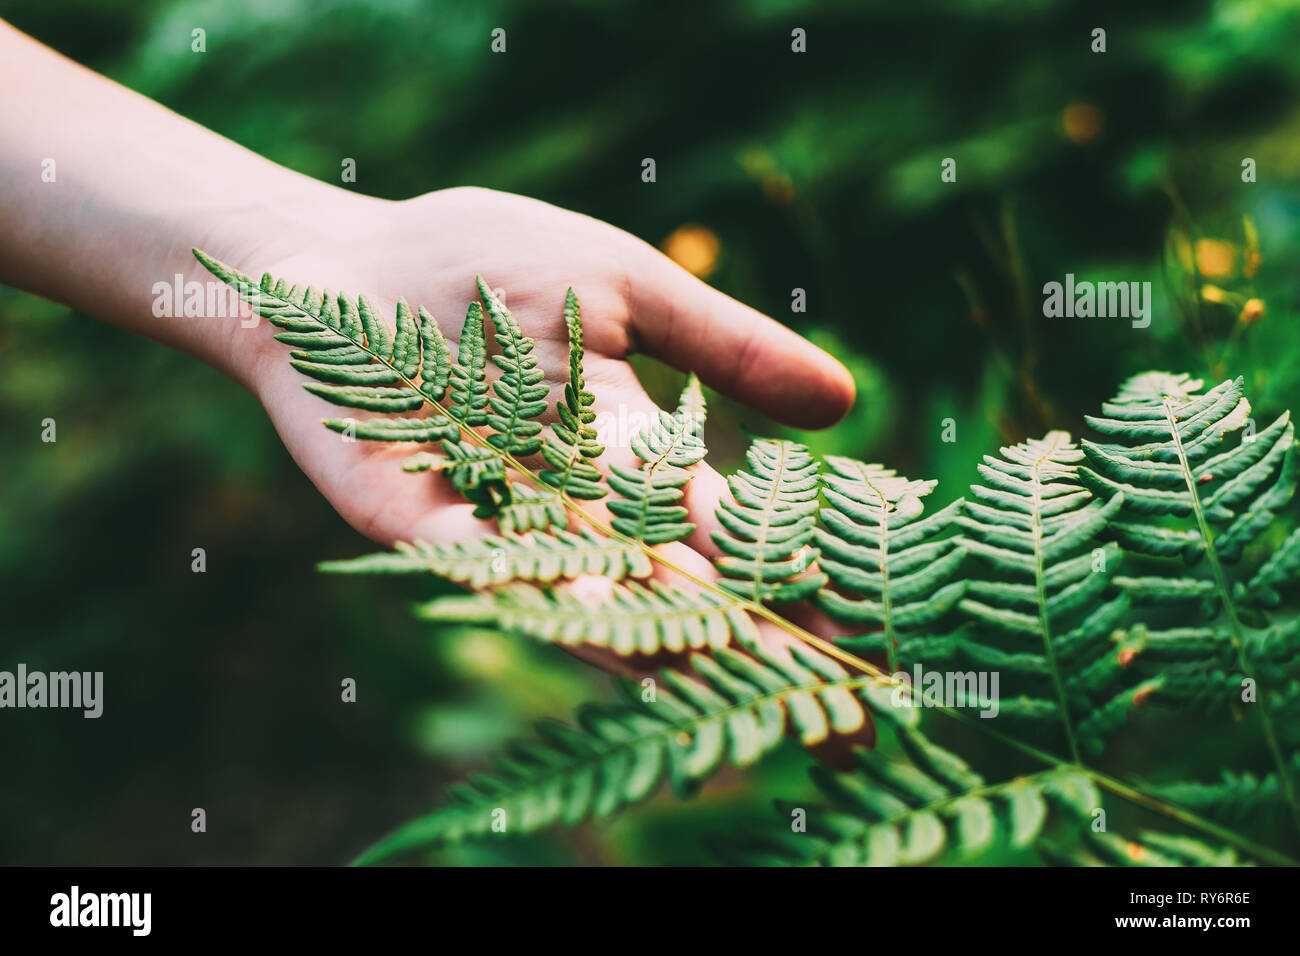 Young Beauty Girl Woman Touching Holding Fern Leaf In Summer Park Forest. Close Up Of Female Hand. Concept Of Nature, Environment Care. Summer Season Stock Photo